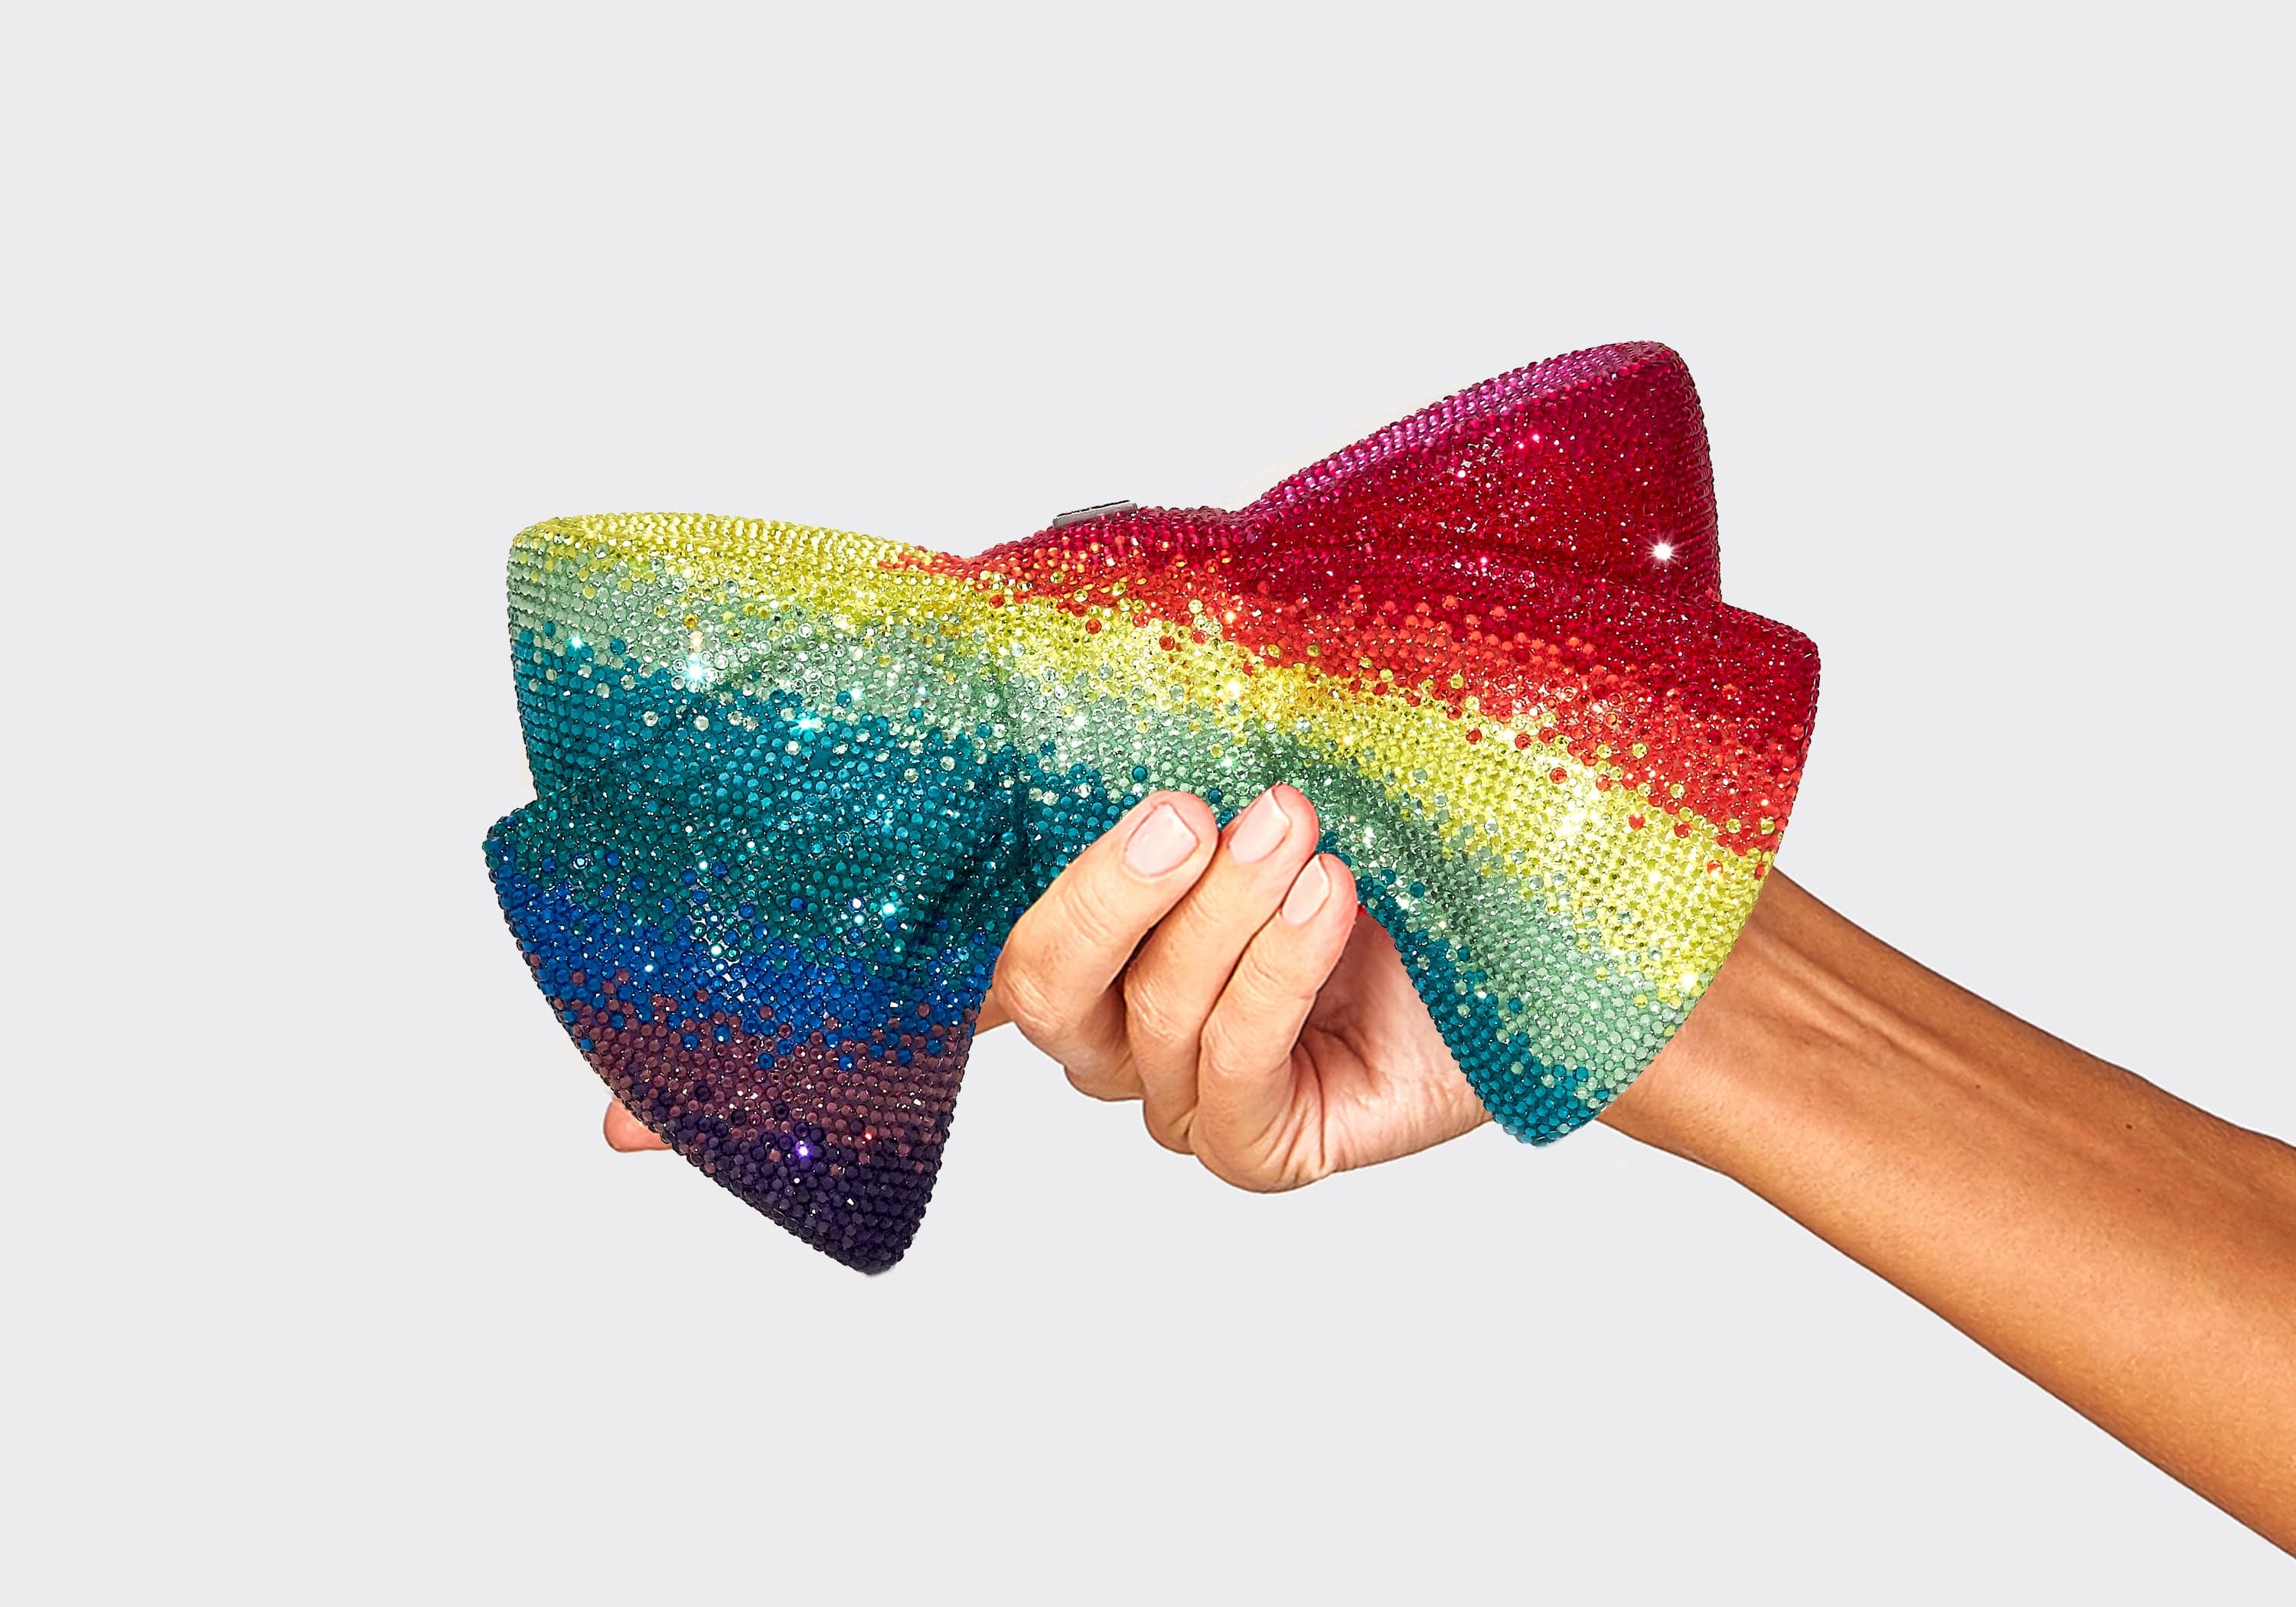 MULTICOLOURED CRYSTAL CLUTCH EVENING BAG, 'BOW JUST FOR YOU', JUDITH LEIBER, 彩色水晶晚裝手袋, 'Bow Just For You', Judith Leiber, Jewels Online, 2019